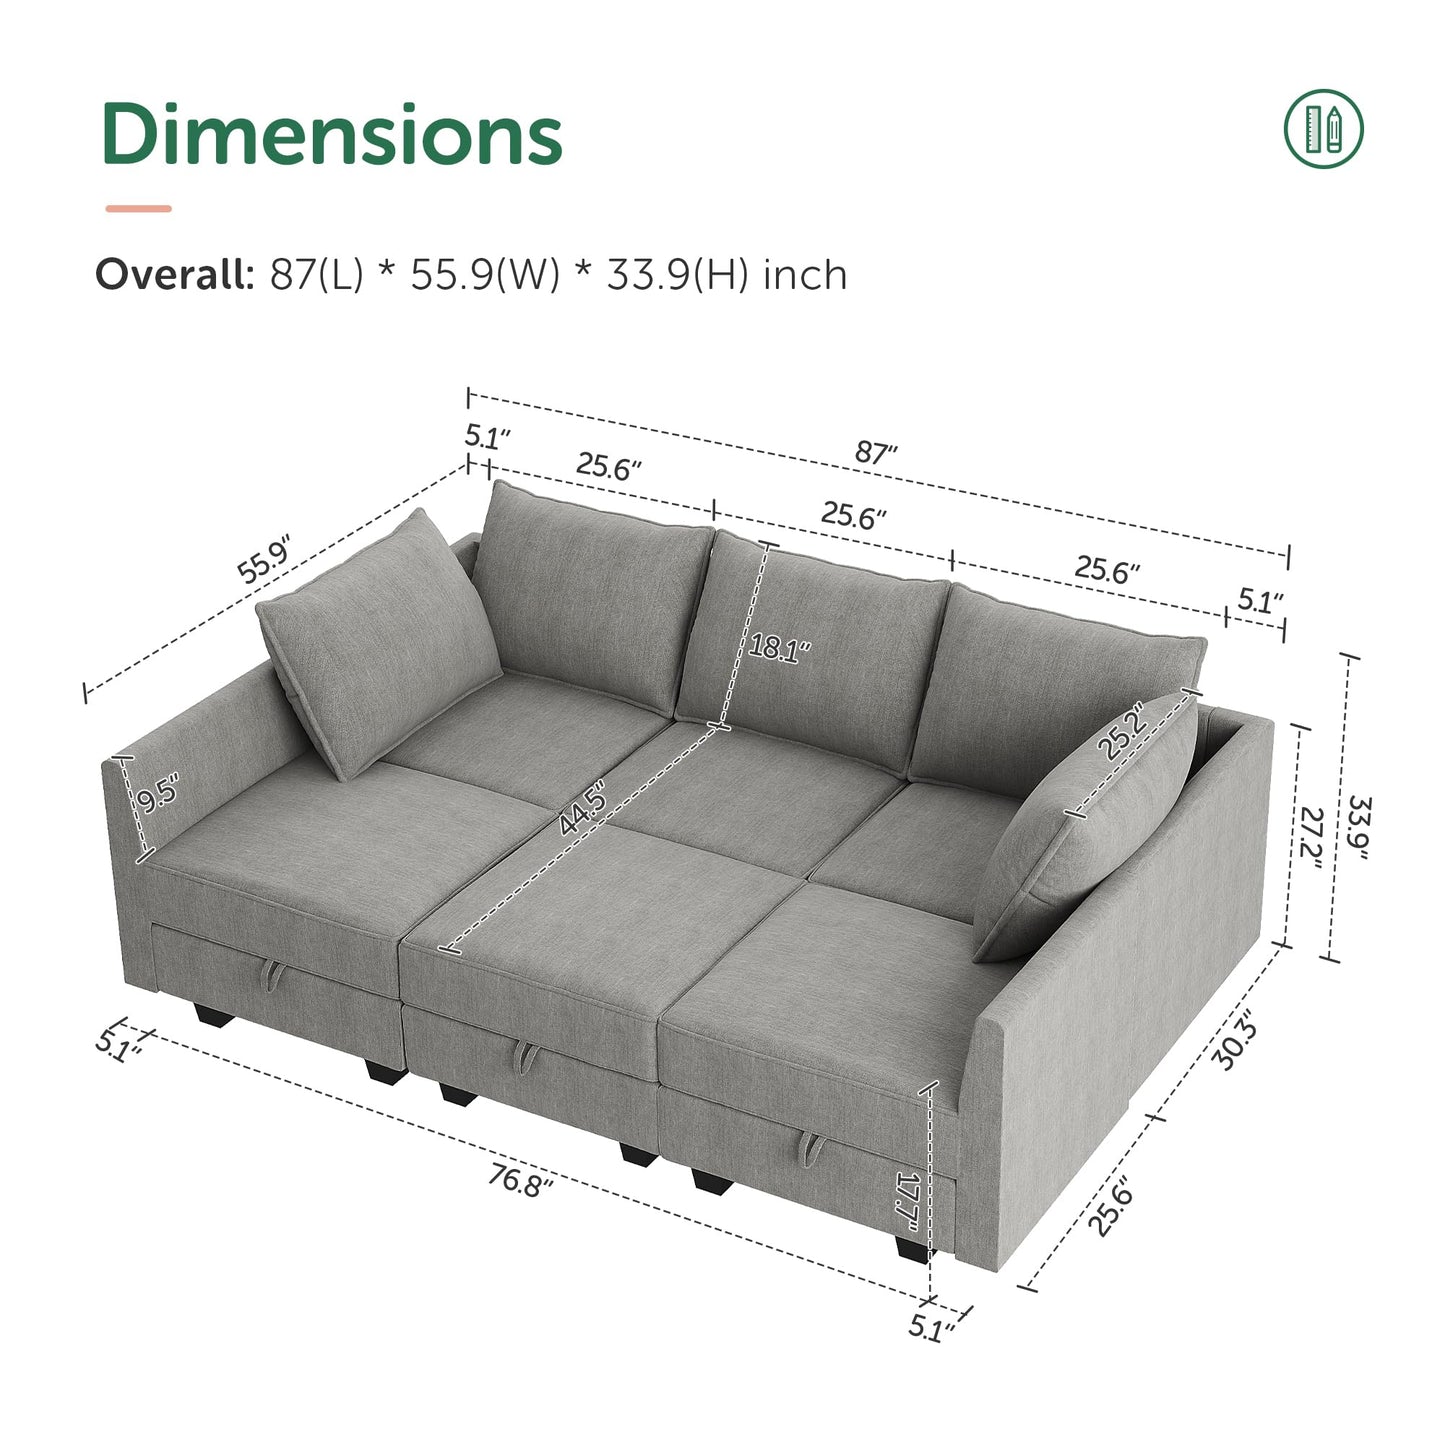 HONBAY Modular Sectional Sleeper Sofa Reversible Modular Couch with Storage Seats Modular Sleeper Sectional Sofa Bed for Living Room, Grey